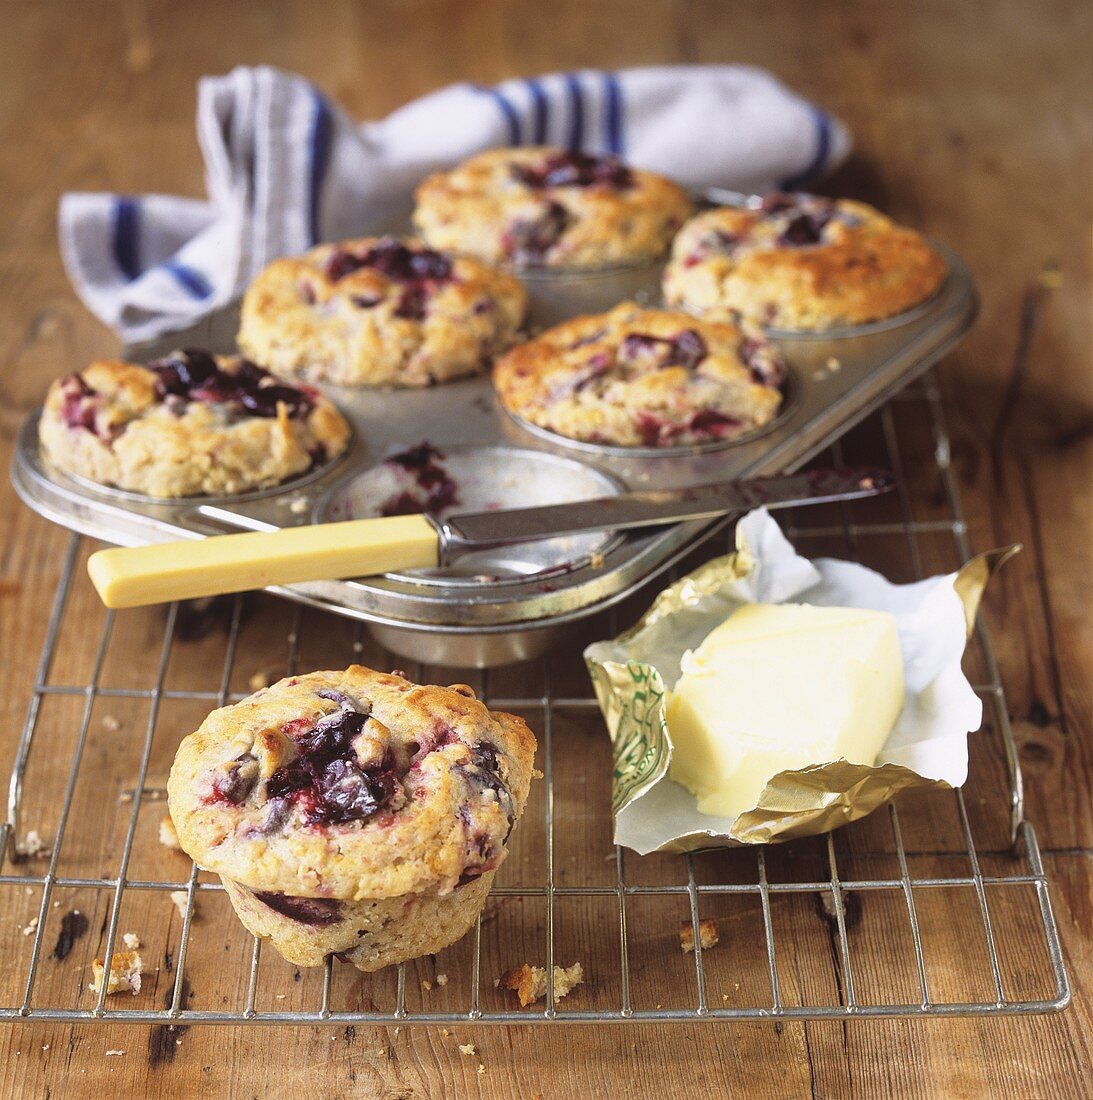 Plum muffins and butter